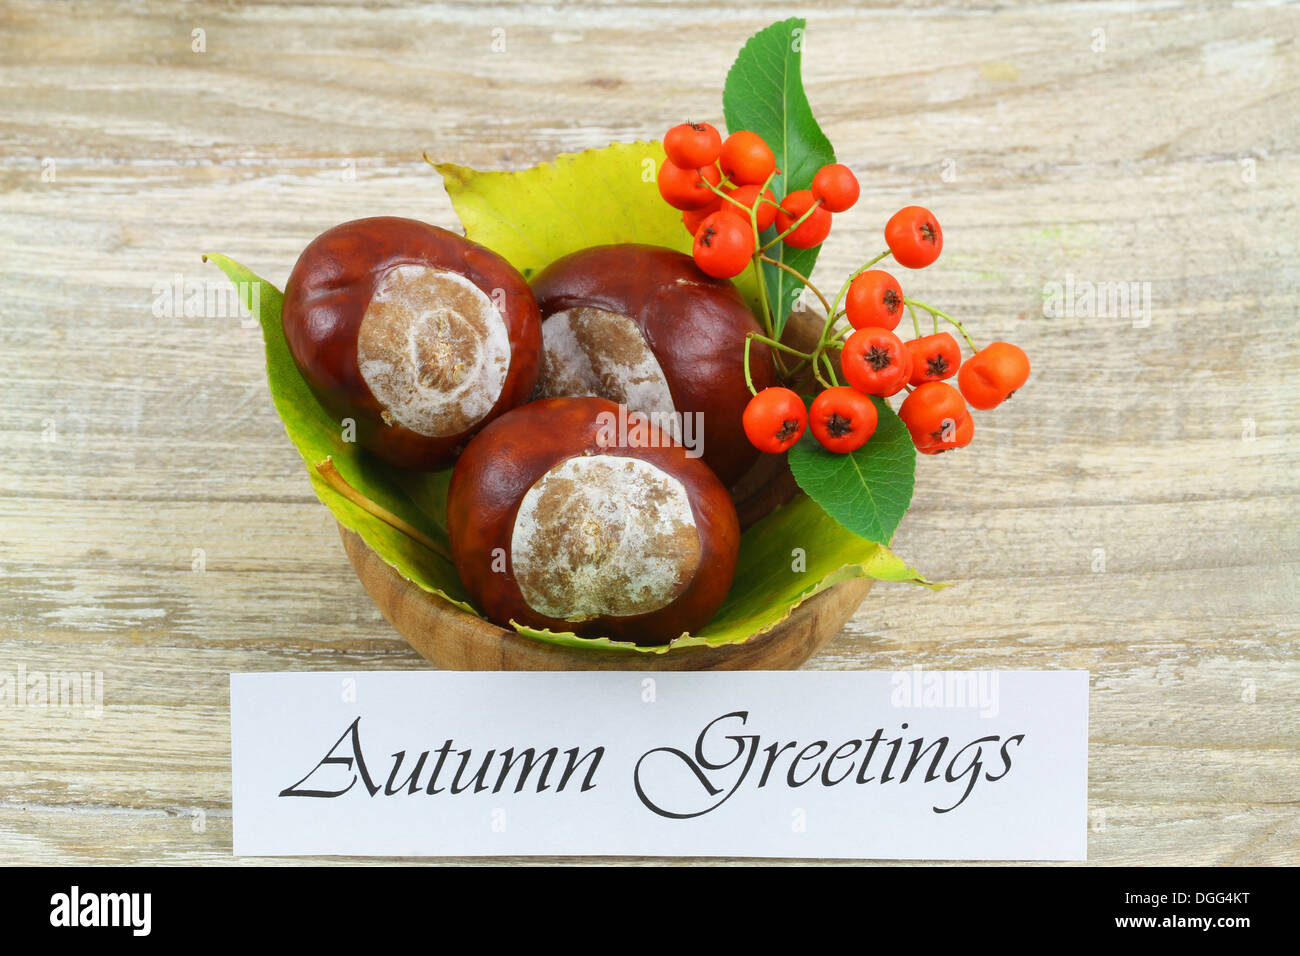 Autumn greetings card with chestnuts, rowan berry and leaves Stock Photo